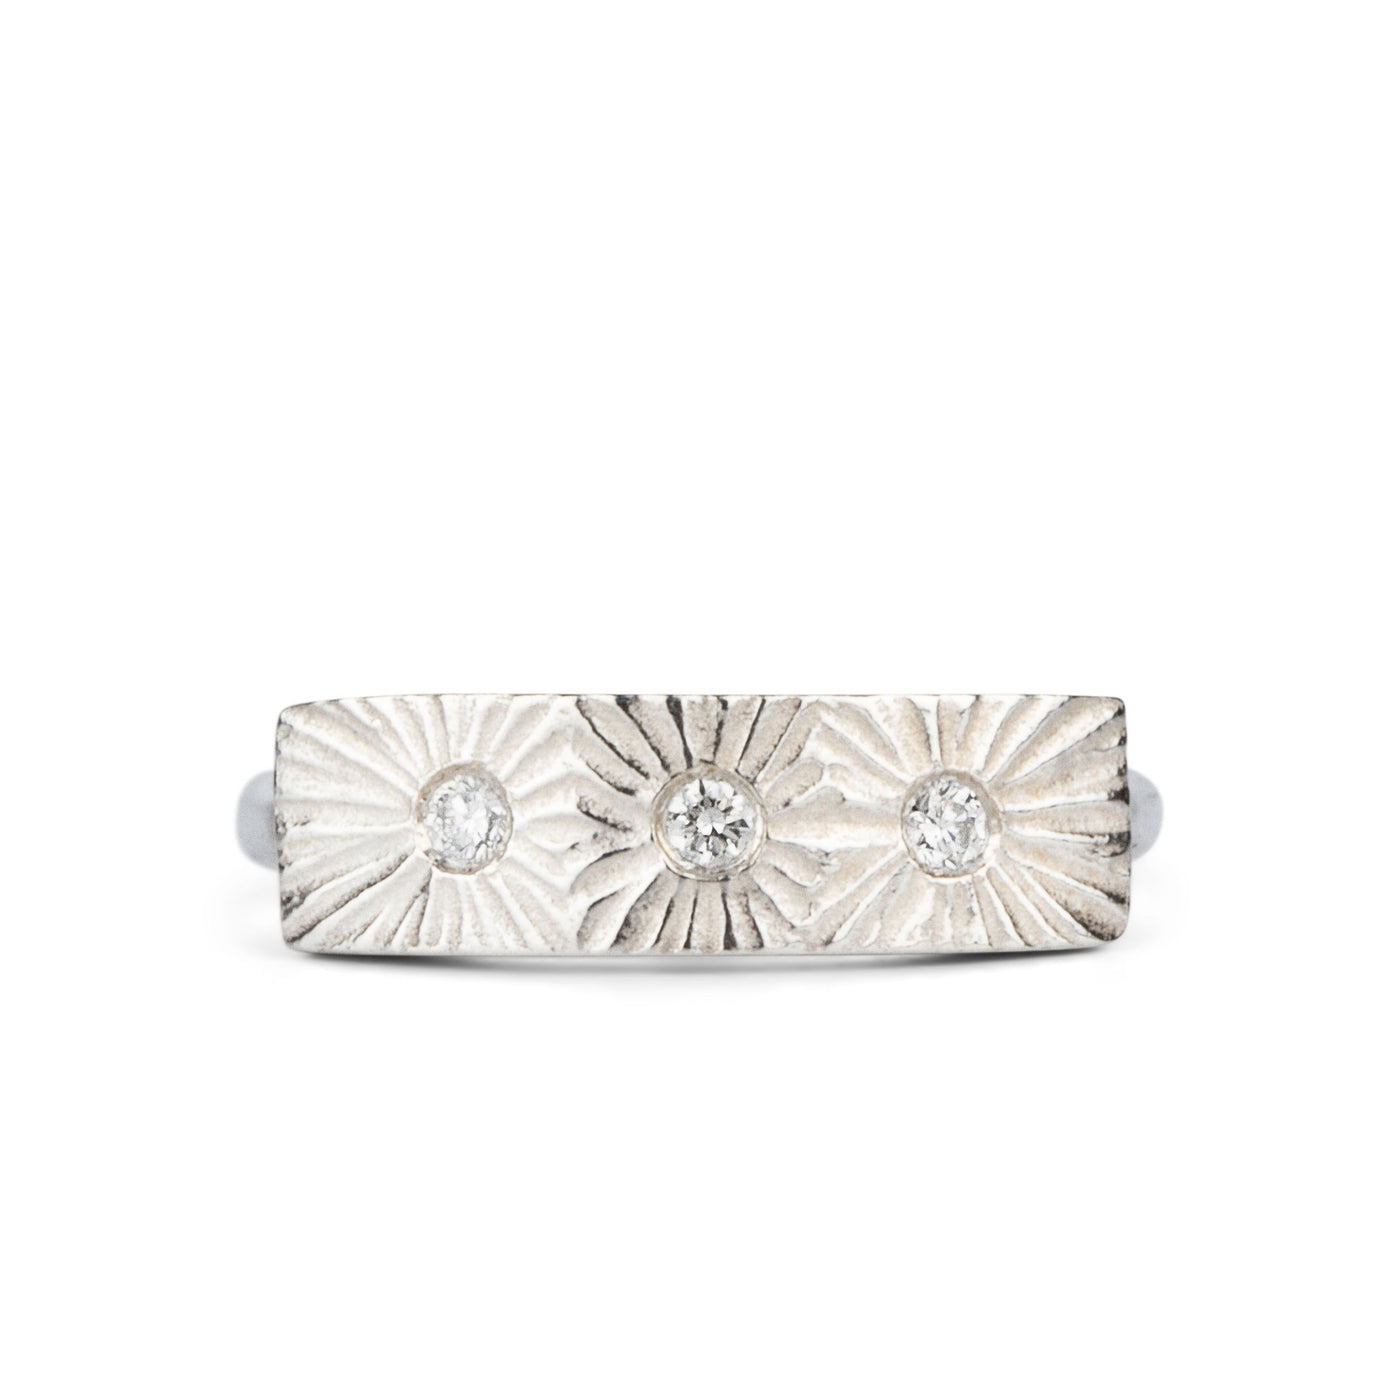 Sterling silver bar ring with three diamonds and a carved sunburst design around each by Corey Egan on a white background